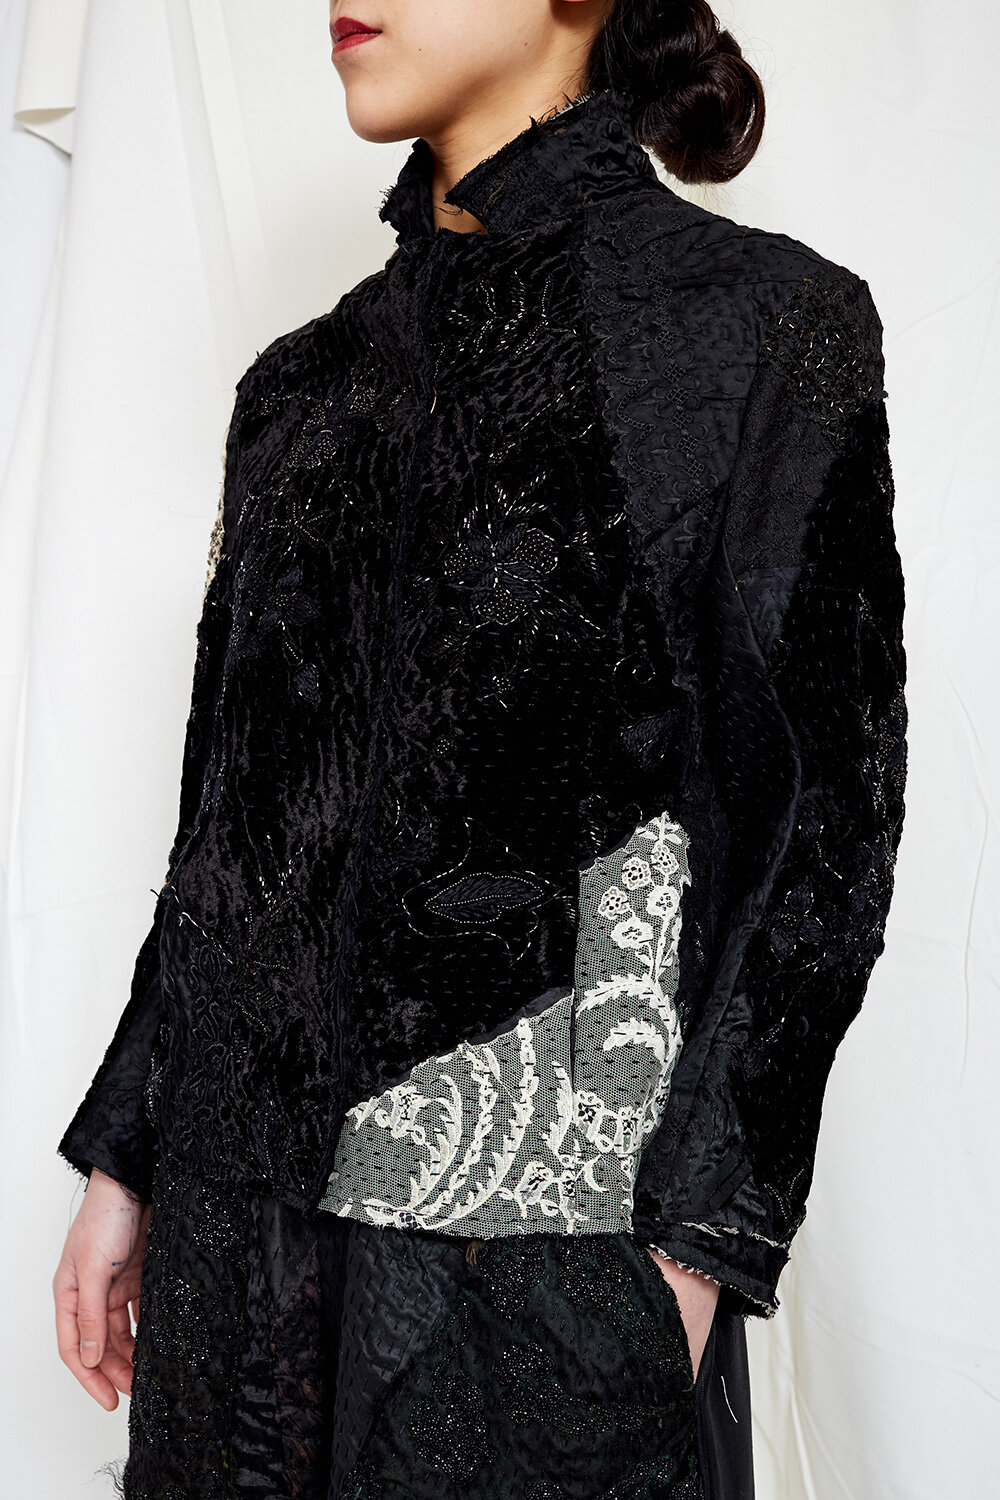 By Walid Womenswear Haya Embroidered Jacket in Black AW20